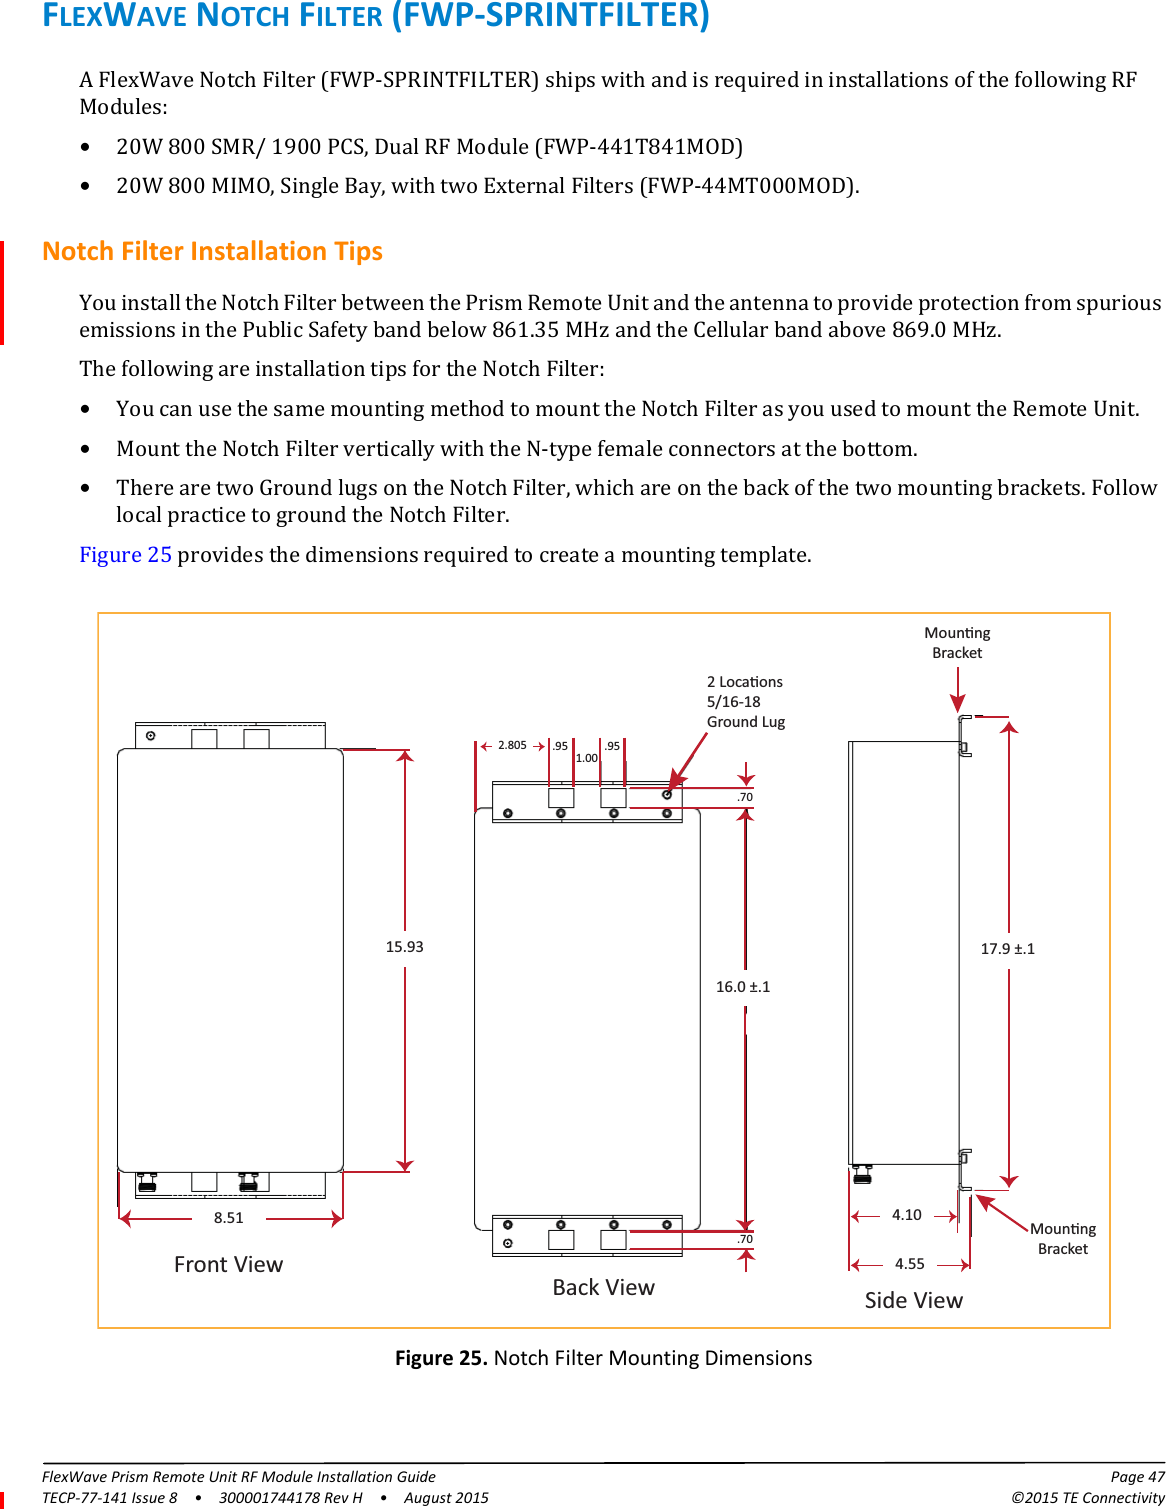 FlexWave Prism Remote Unit RF Module Installation Guide Page 47TECP-77-141 Issue 8  •  300001744178 Rev H  •  August 2015 ©2015 TE ConnectivityFLEXWAVE NOTCH FILTER (FWP-SPRINTFILTER)A FlexWave Notch Filter (FWP-SPRINTFILTER) ships with and is required in installations of the following RF Modules:•20W 800 SMR/ 1900 PCS, Dual RF Module (FWP-441T841MOD)•20W 800 MIMO, Single Bay, with two External Filters (FWP-44MT000MOD).Notch Filter Installation TipsYou install the Notch Filter between the Prism Remote Unit and the antenna to provide protection from spurious emissions in the Public Safety band below 861.35 MHz and the Cellular band above 869.0 MHz. The following are installation tips for the Notch Filter:•You can use the same mounting method to mount the Notch Filter as you used to mount the Remote Unit. •Mount the Notch Filter vertically with the N-type female connectors at the bottom. •There are two Ground lugs on the Notch Filter, which are on the back of the two mounting brackets. Follow local practice to ground the Notch Filter.Figure 25 provides the dimensions required to create a mounting template.16.0 ±.1.70.702.805 .95 .951.002 Locaons5/16-18Ground LugFront ViewSide ViewBack View4.5517.9 ±.14.10 MounngBracket15.938.51MounngBracketFigure 25. Notch Filter Mounting Dimensions